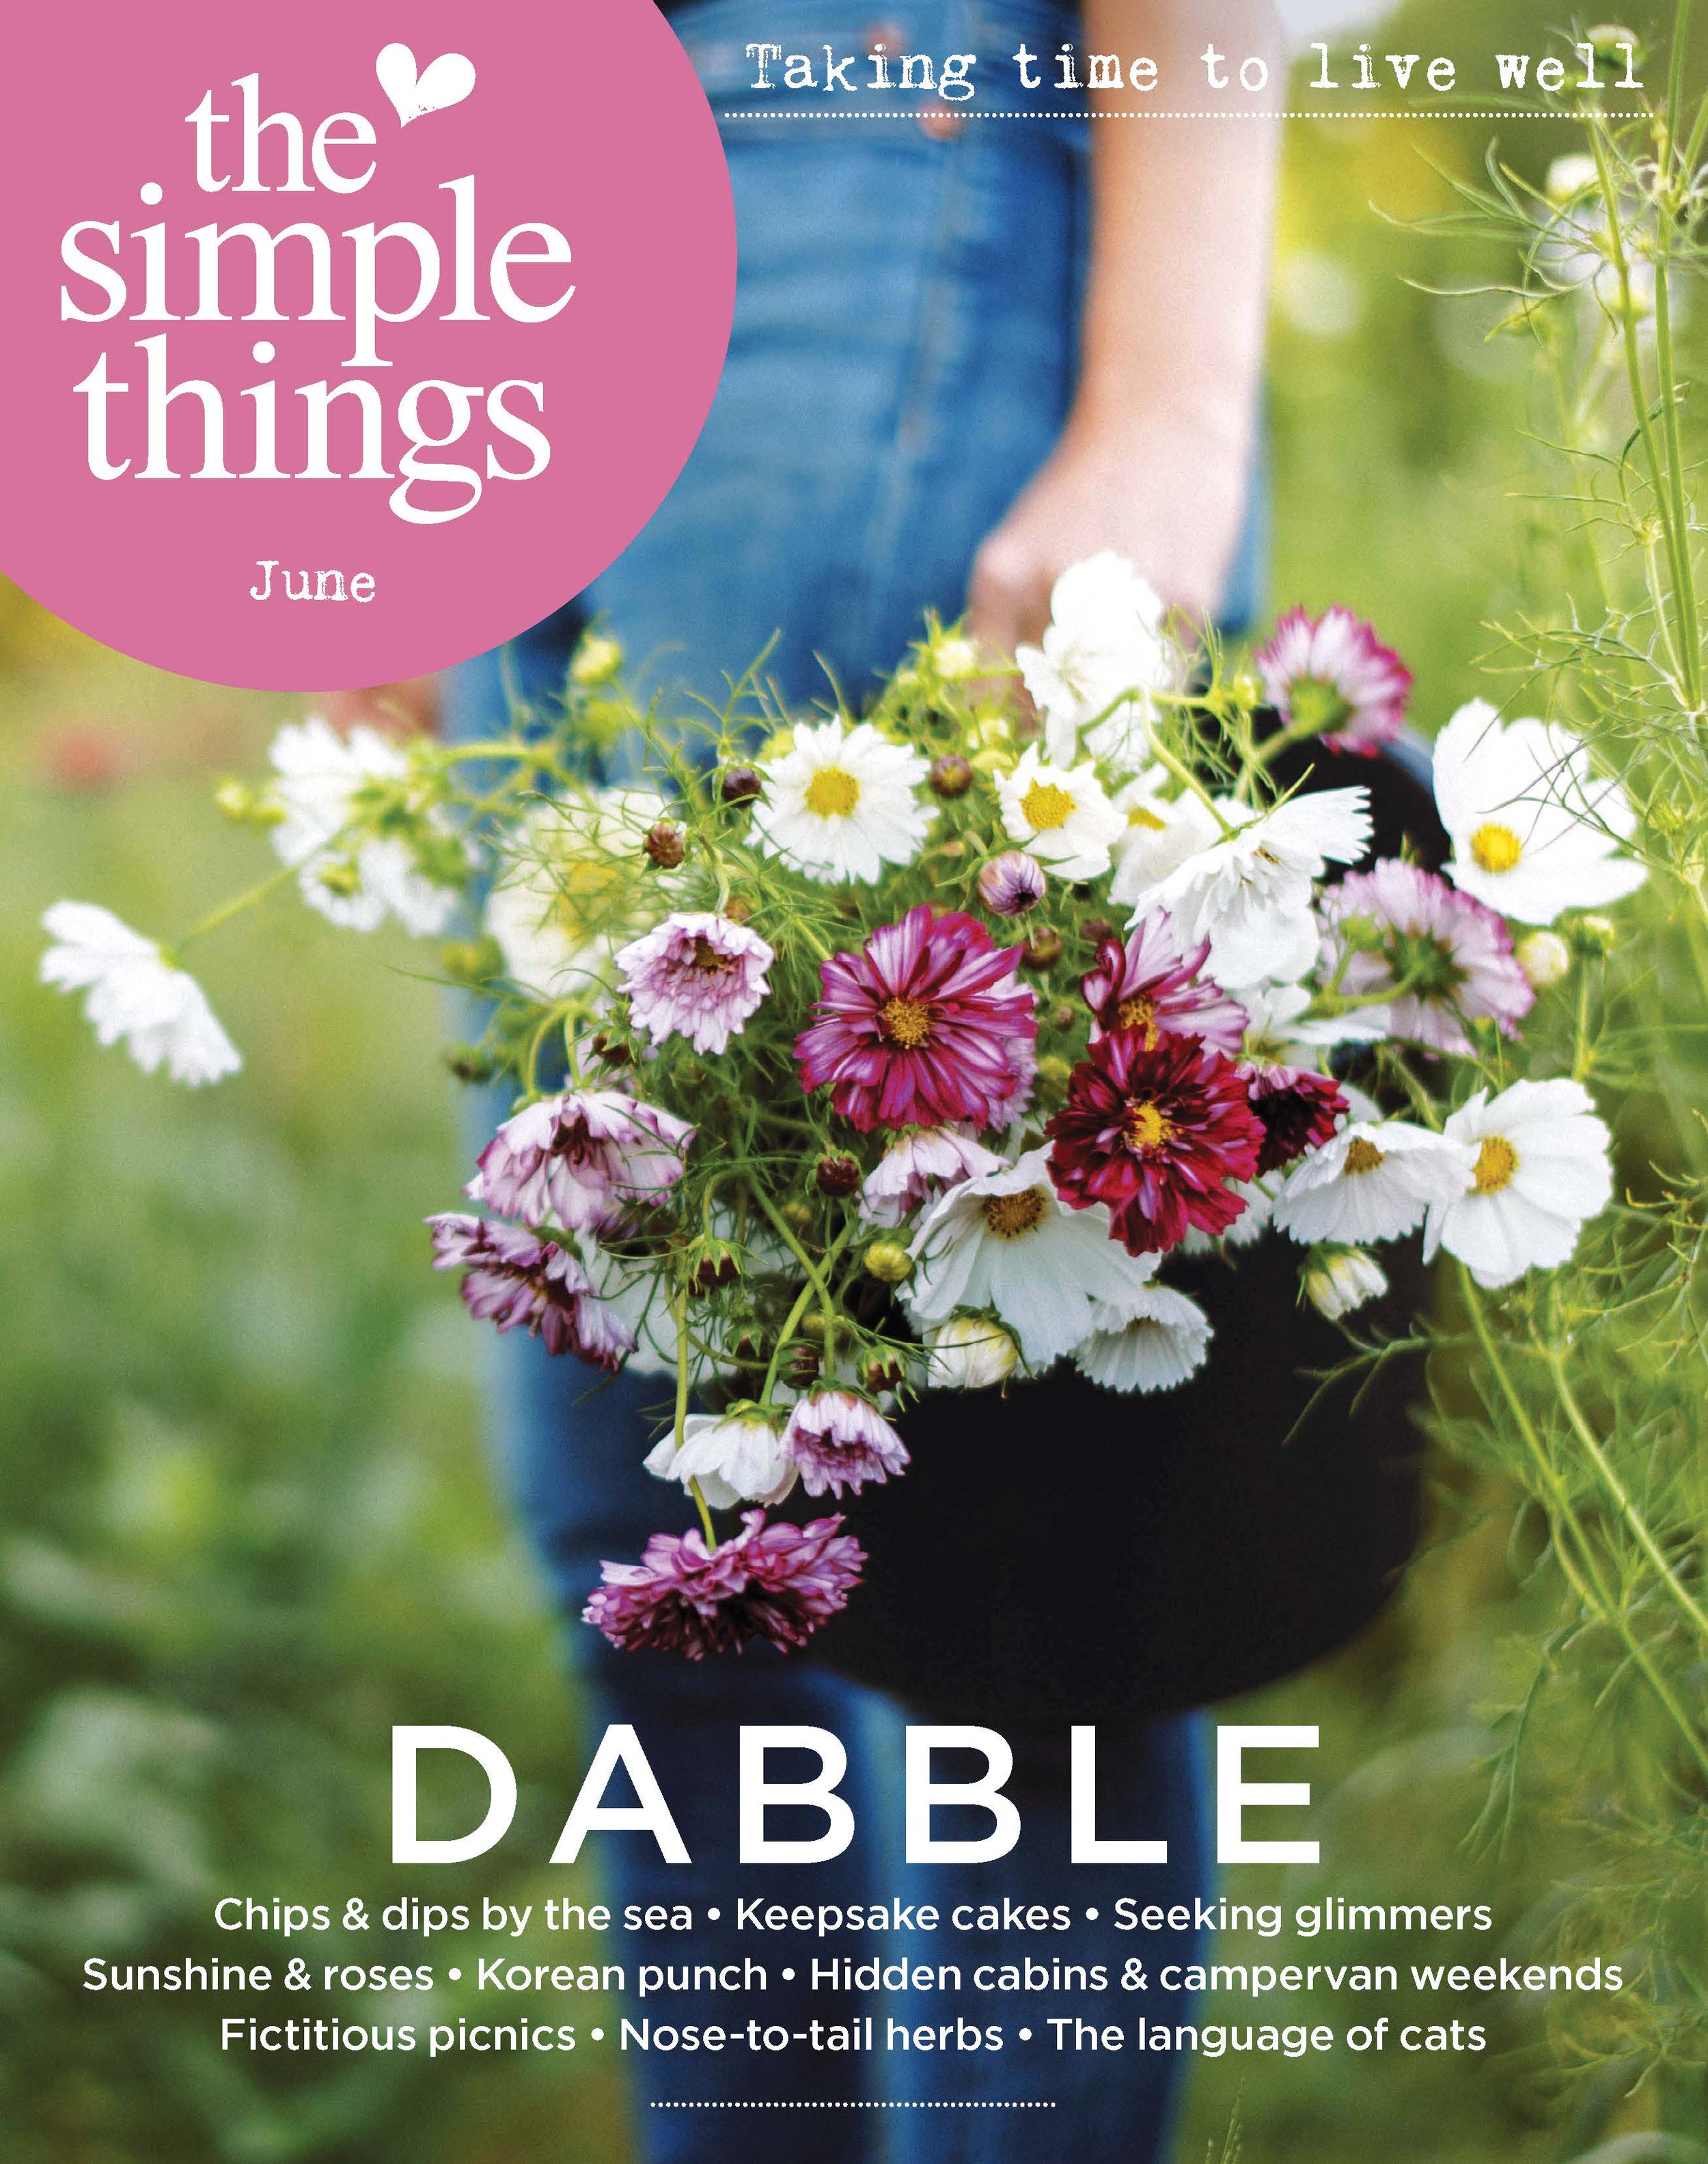  JUNE ISSUE   Buy,  download  or  subscribe   See the sample of our latest issue  here   Buy a copy of Flourish 2, our  wellbeing bookazine , or our  Everyday Anthology .  Listen to our new podcast -  Small Ways to Live Well  